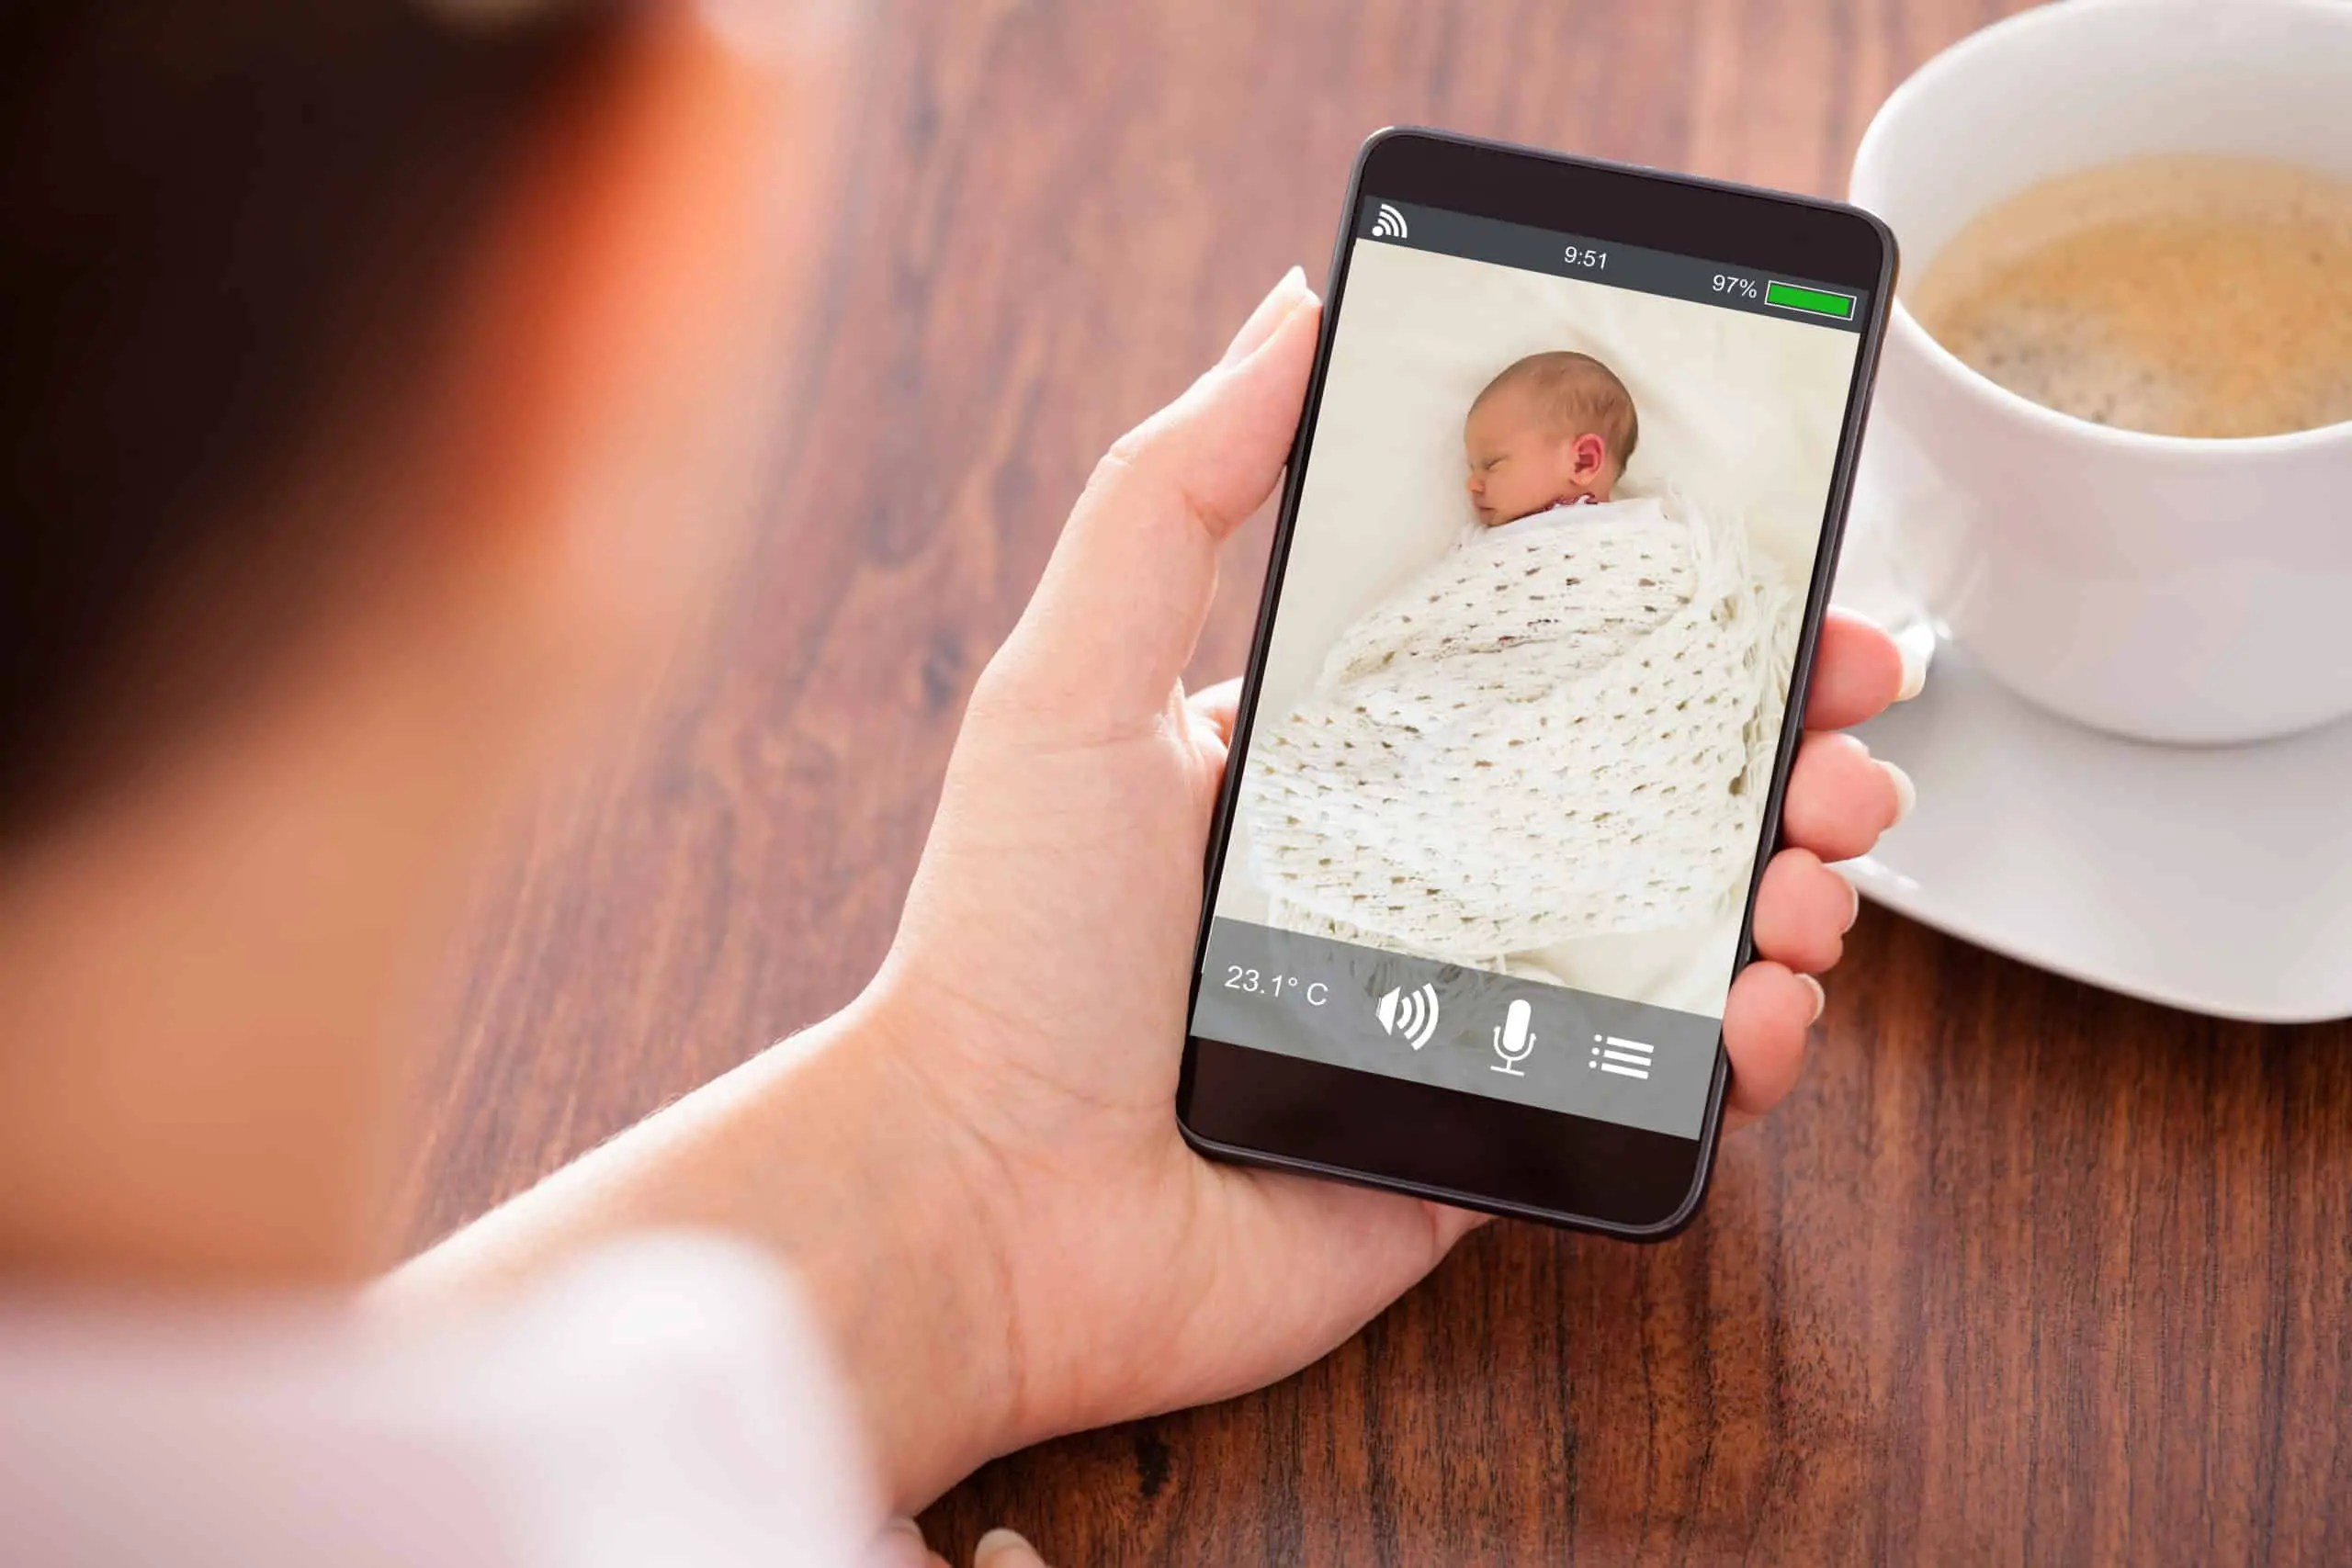 Baby monitored on phone